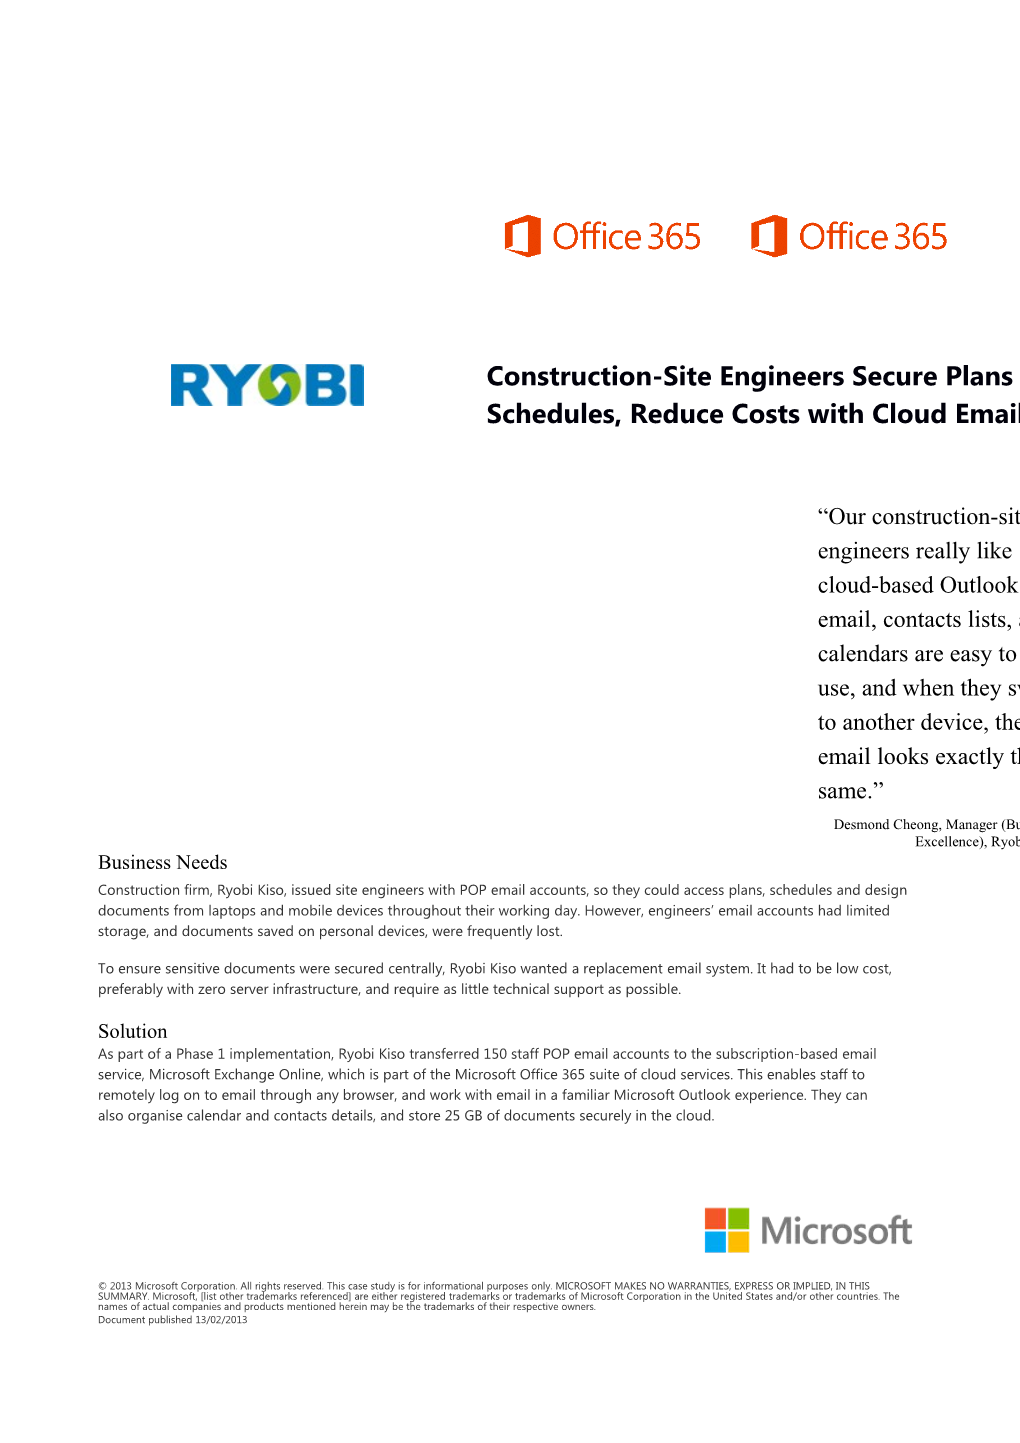 Construction-Site Engineers Secure Plans & Schedules, Reduce Costs with Cloud Email